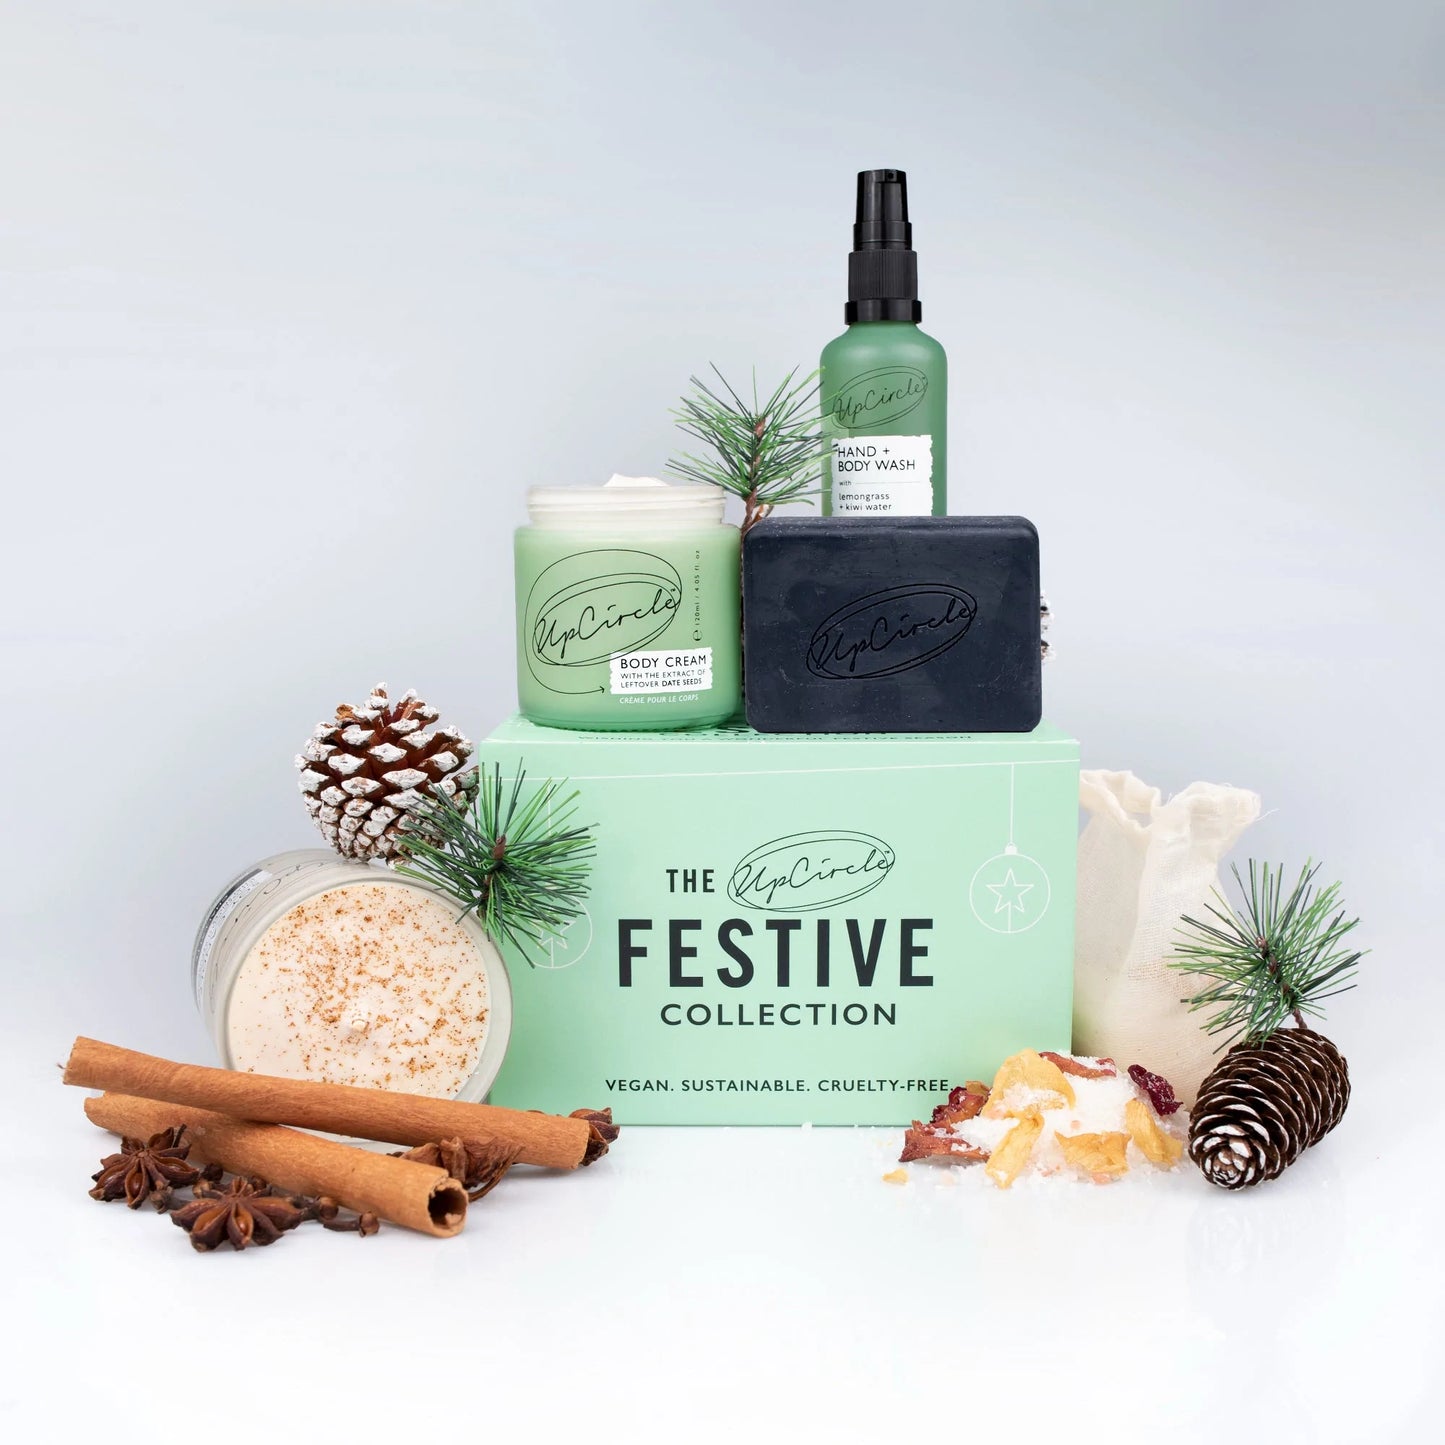 UpCircle Festive Collection